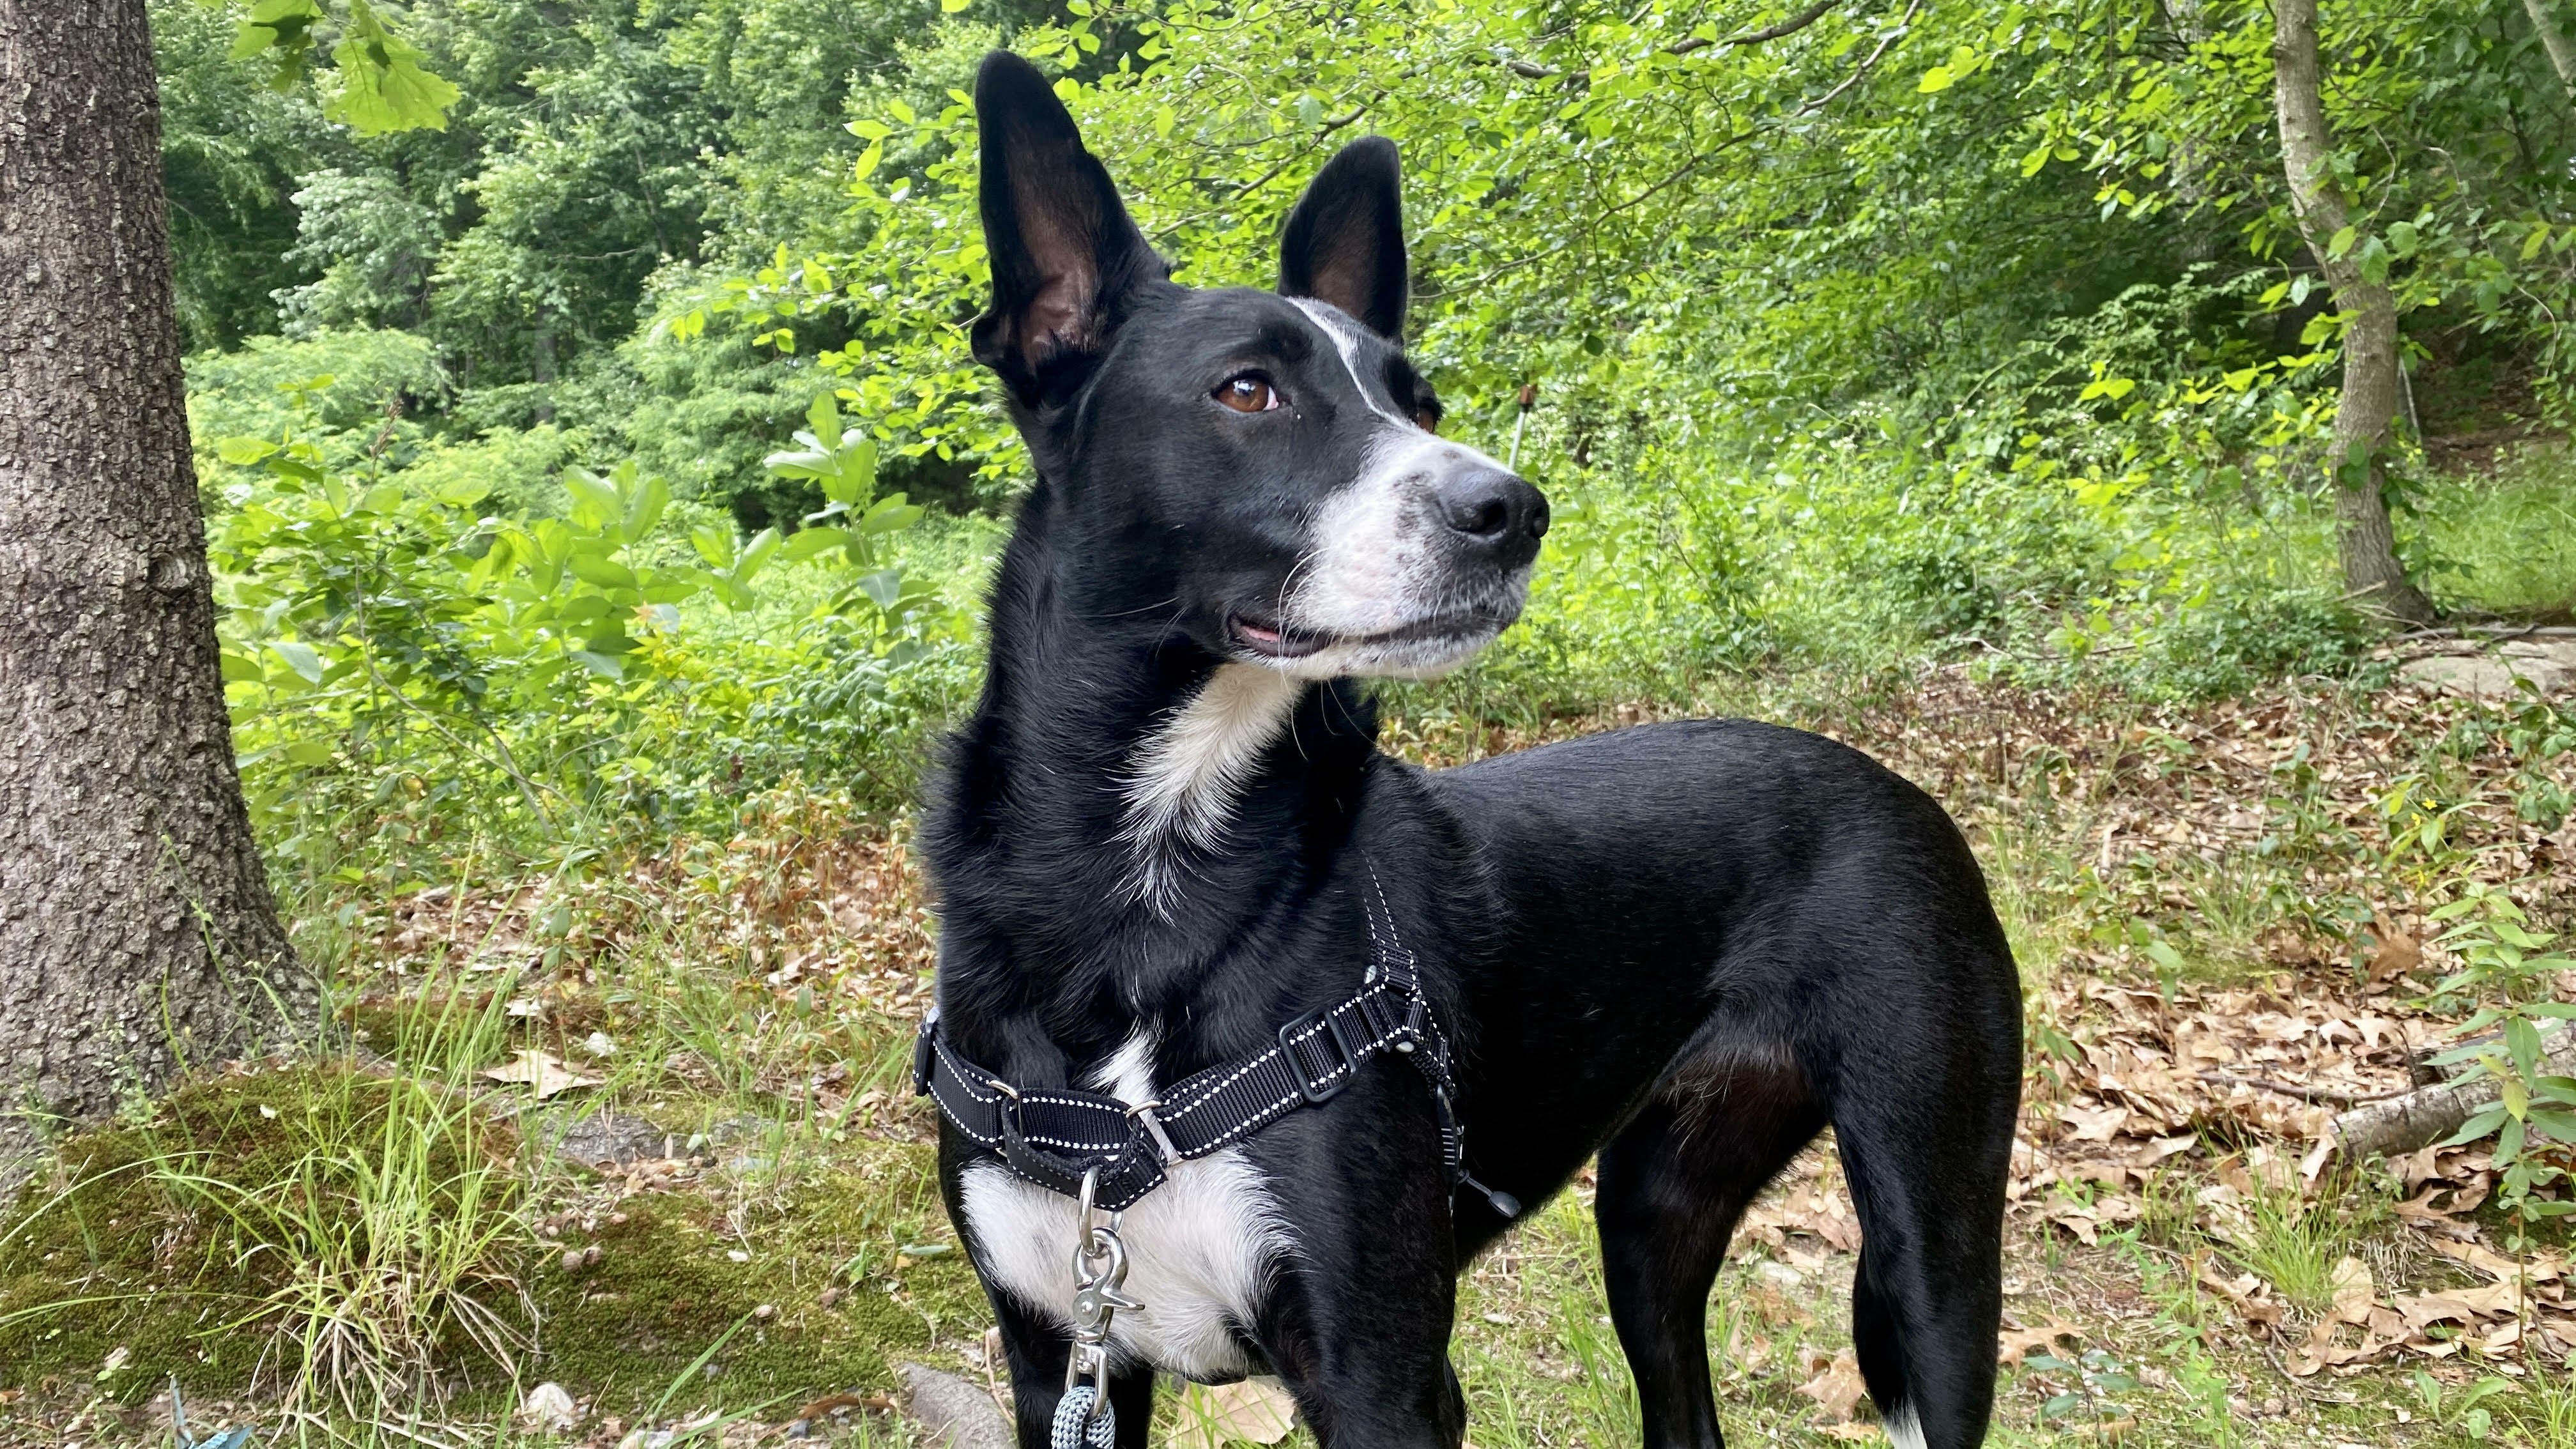 Black and white dog in nature wearing a low-profile black harness